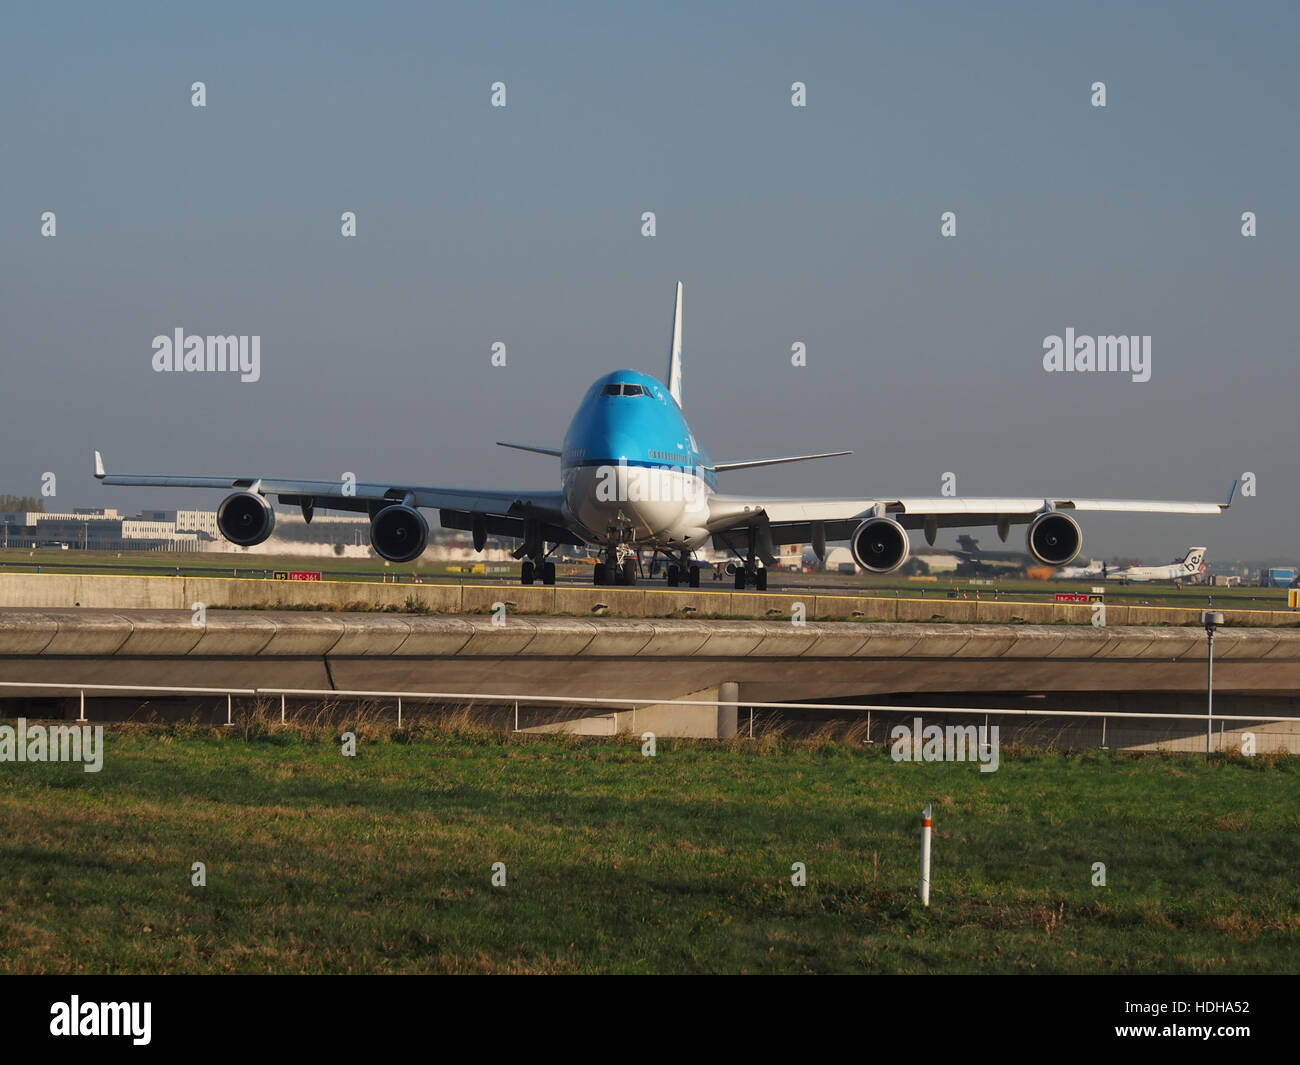 PH-BFB KLM Royal Dutch Airlines Boeing 747-406 at Schiphol taxiing towards runway 36L pic1 Stock Photo